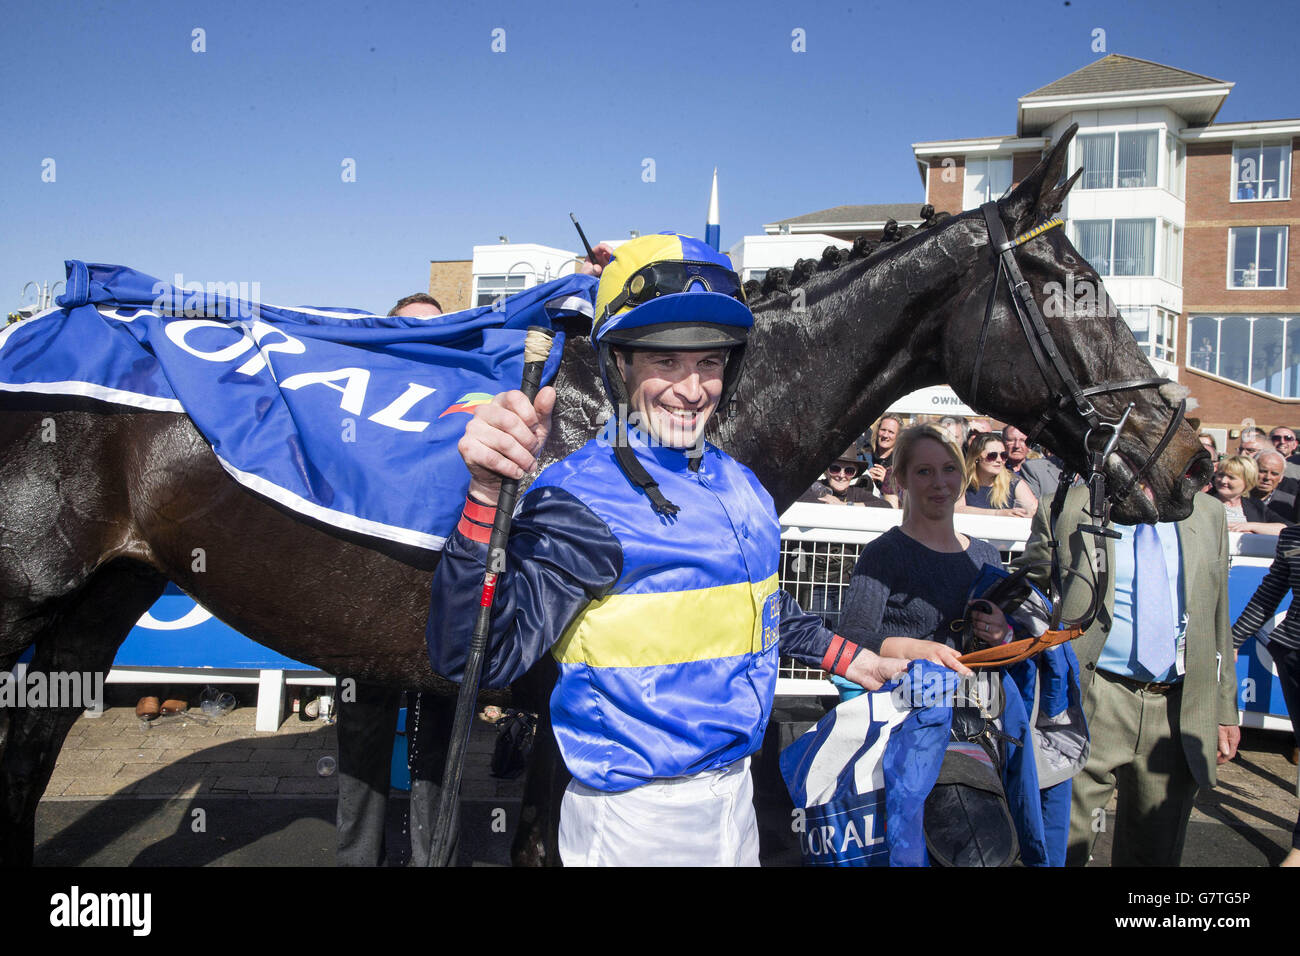 Robert Dunne celebrates after winning the Coral Scottish Grand National Handicap Chase on Wayward Prince during the 2015 Coral Scottish Grand National Festival at Ayr Racecourse. Stock Photo